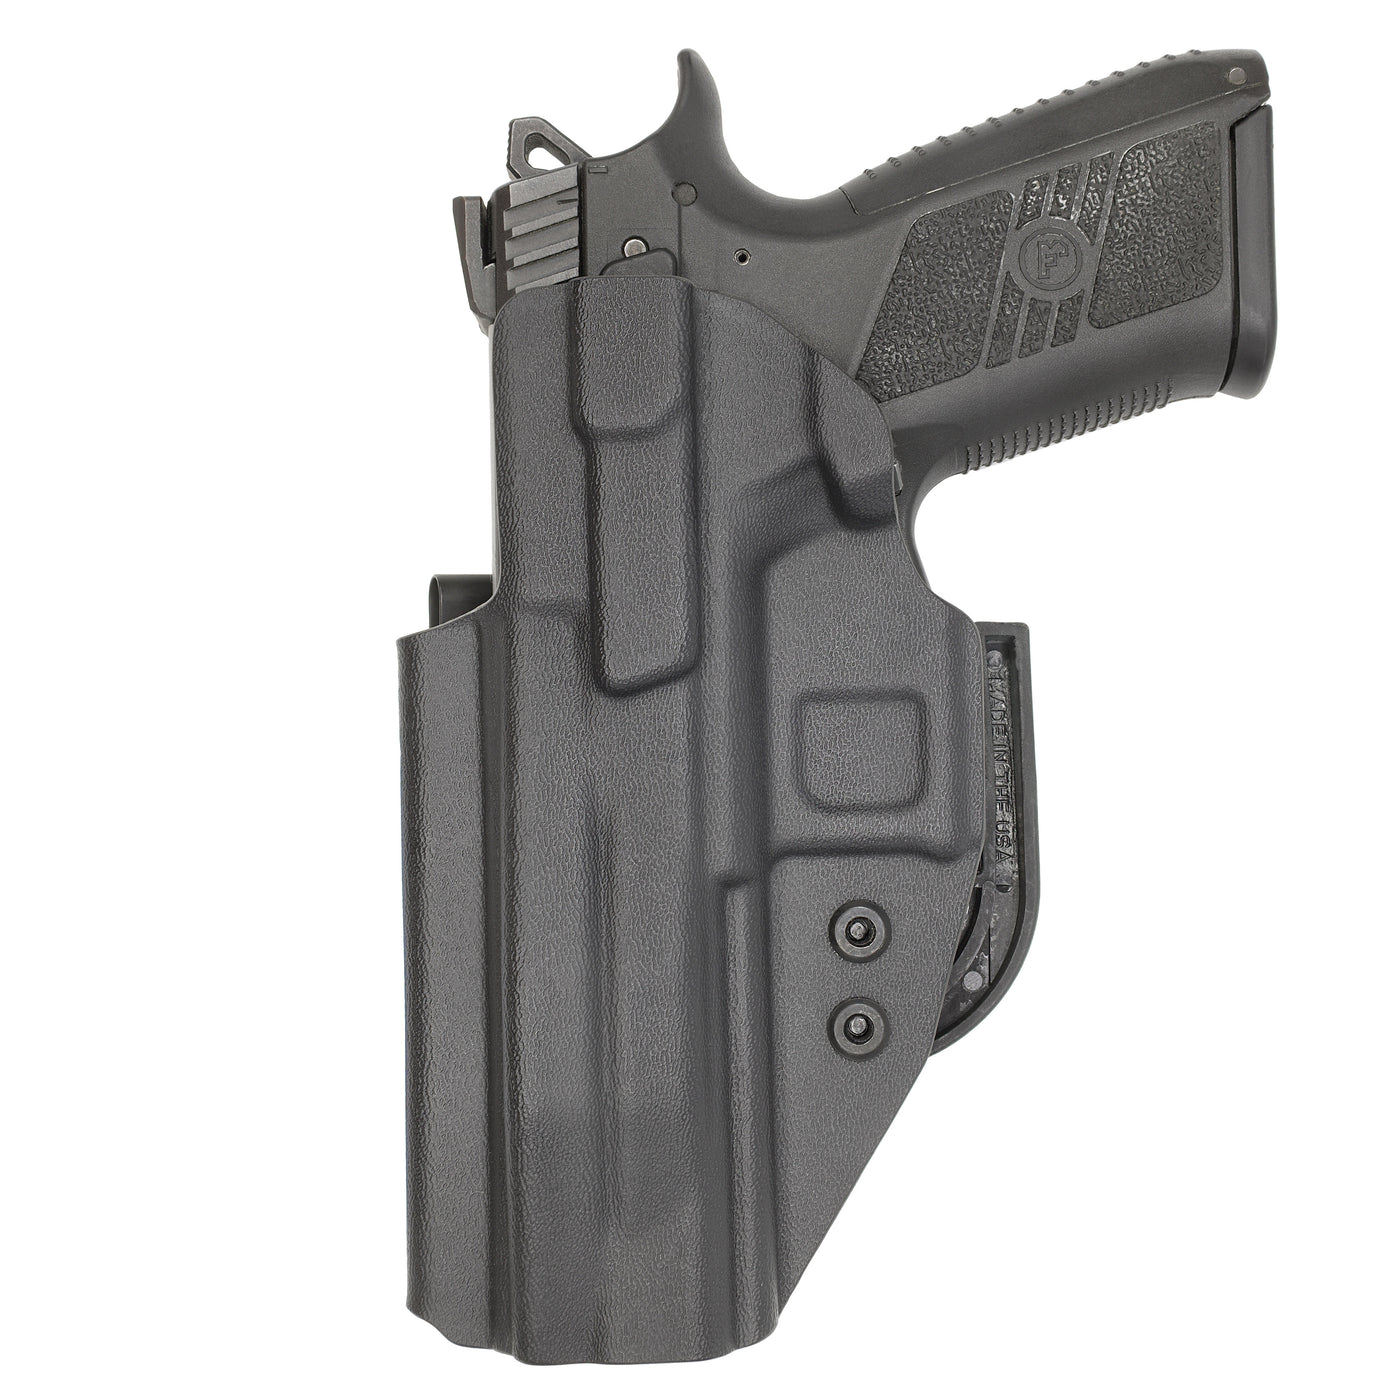 C&G Holsters Quickship IWB ALPHA UPGRADE Covert CZ P09 in holstered position back view